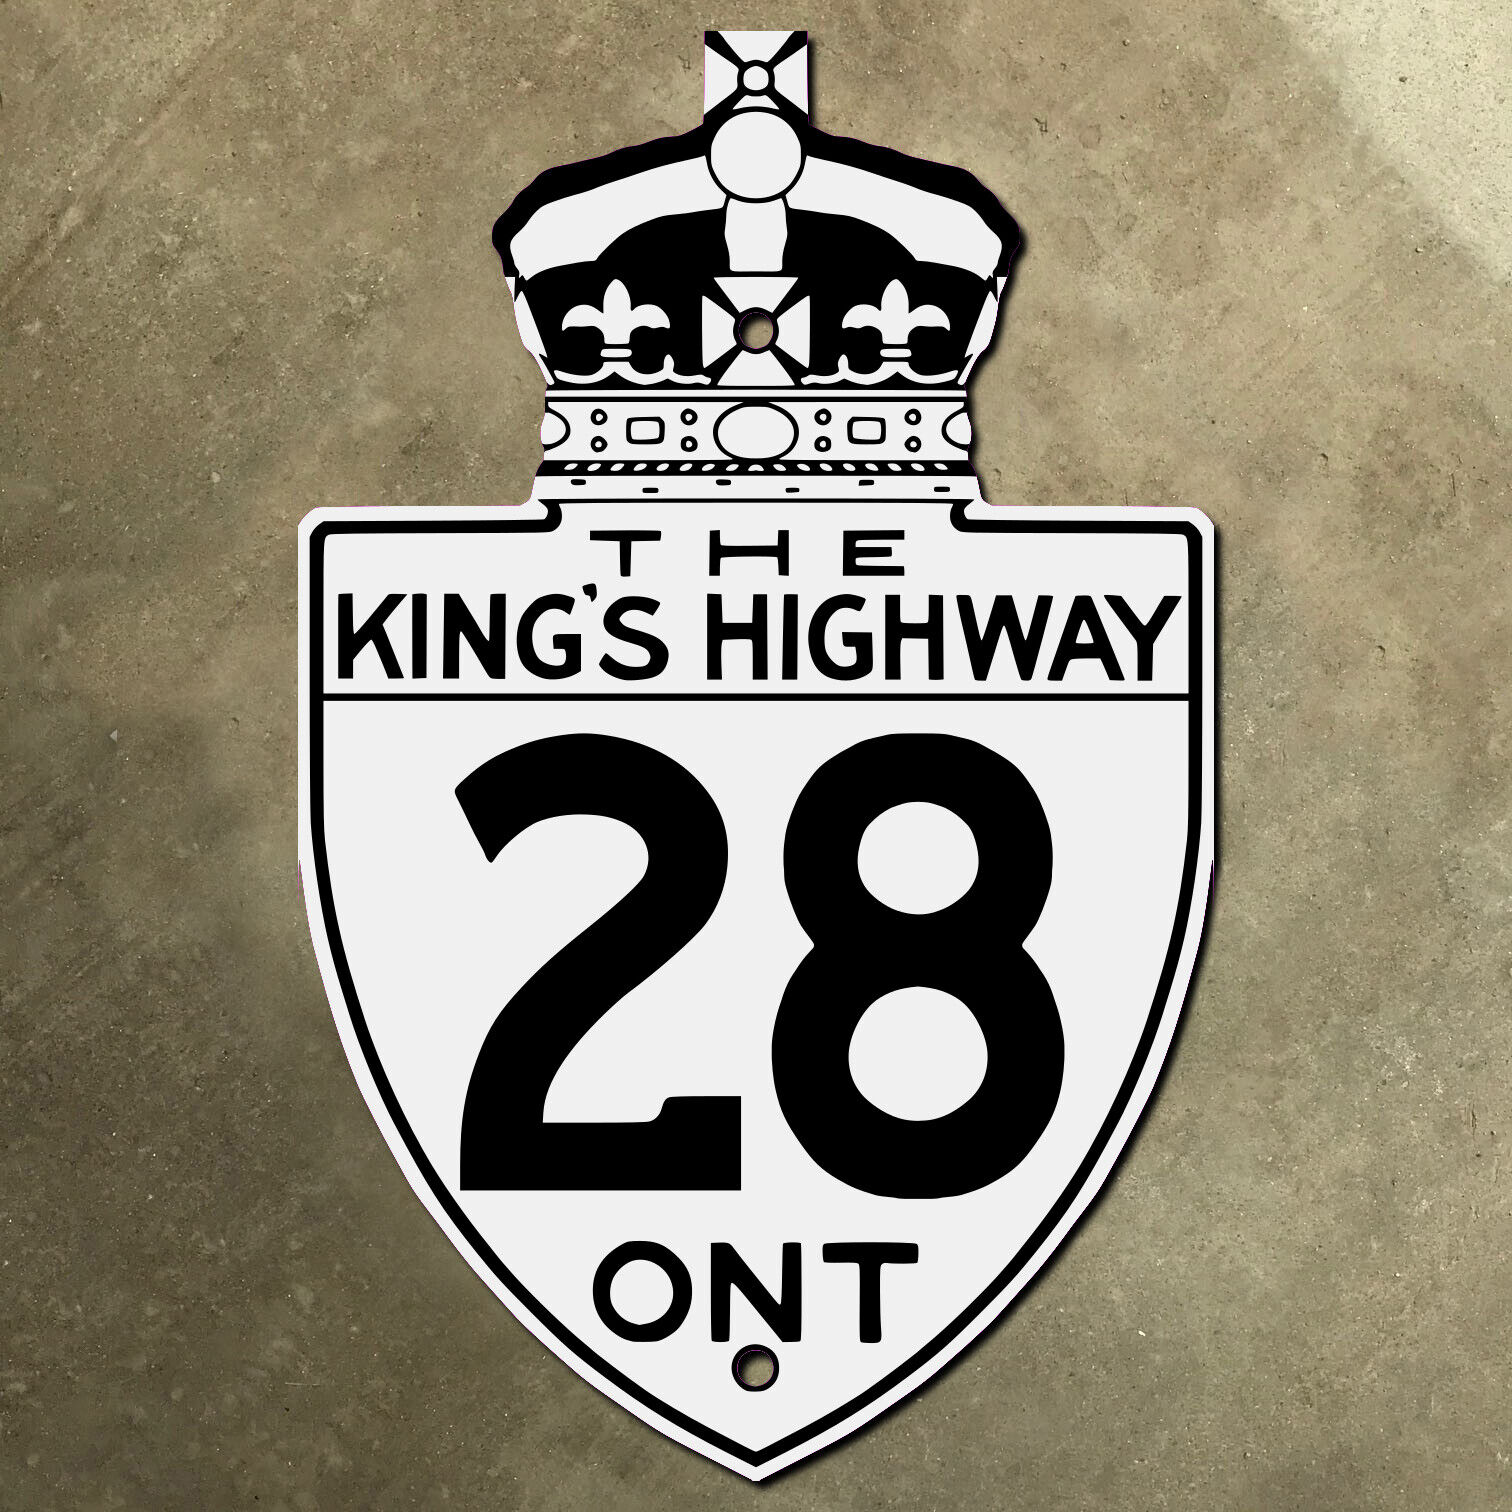 Ontario King's Highway 28 route marker road sign Canada 1930s Peterborough